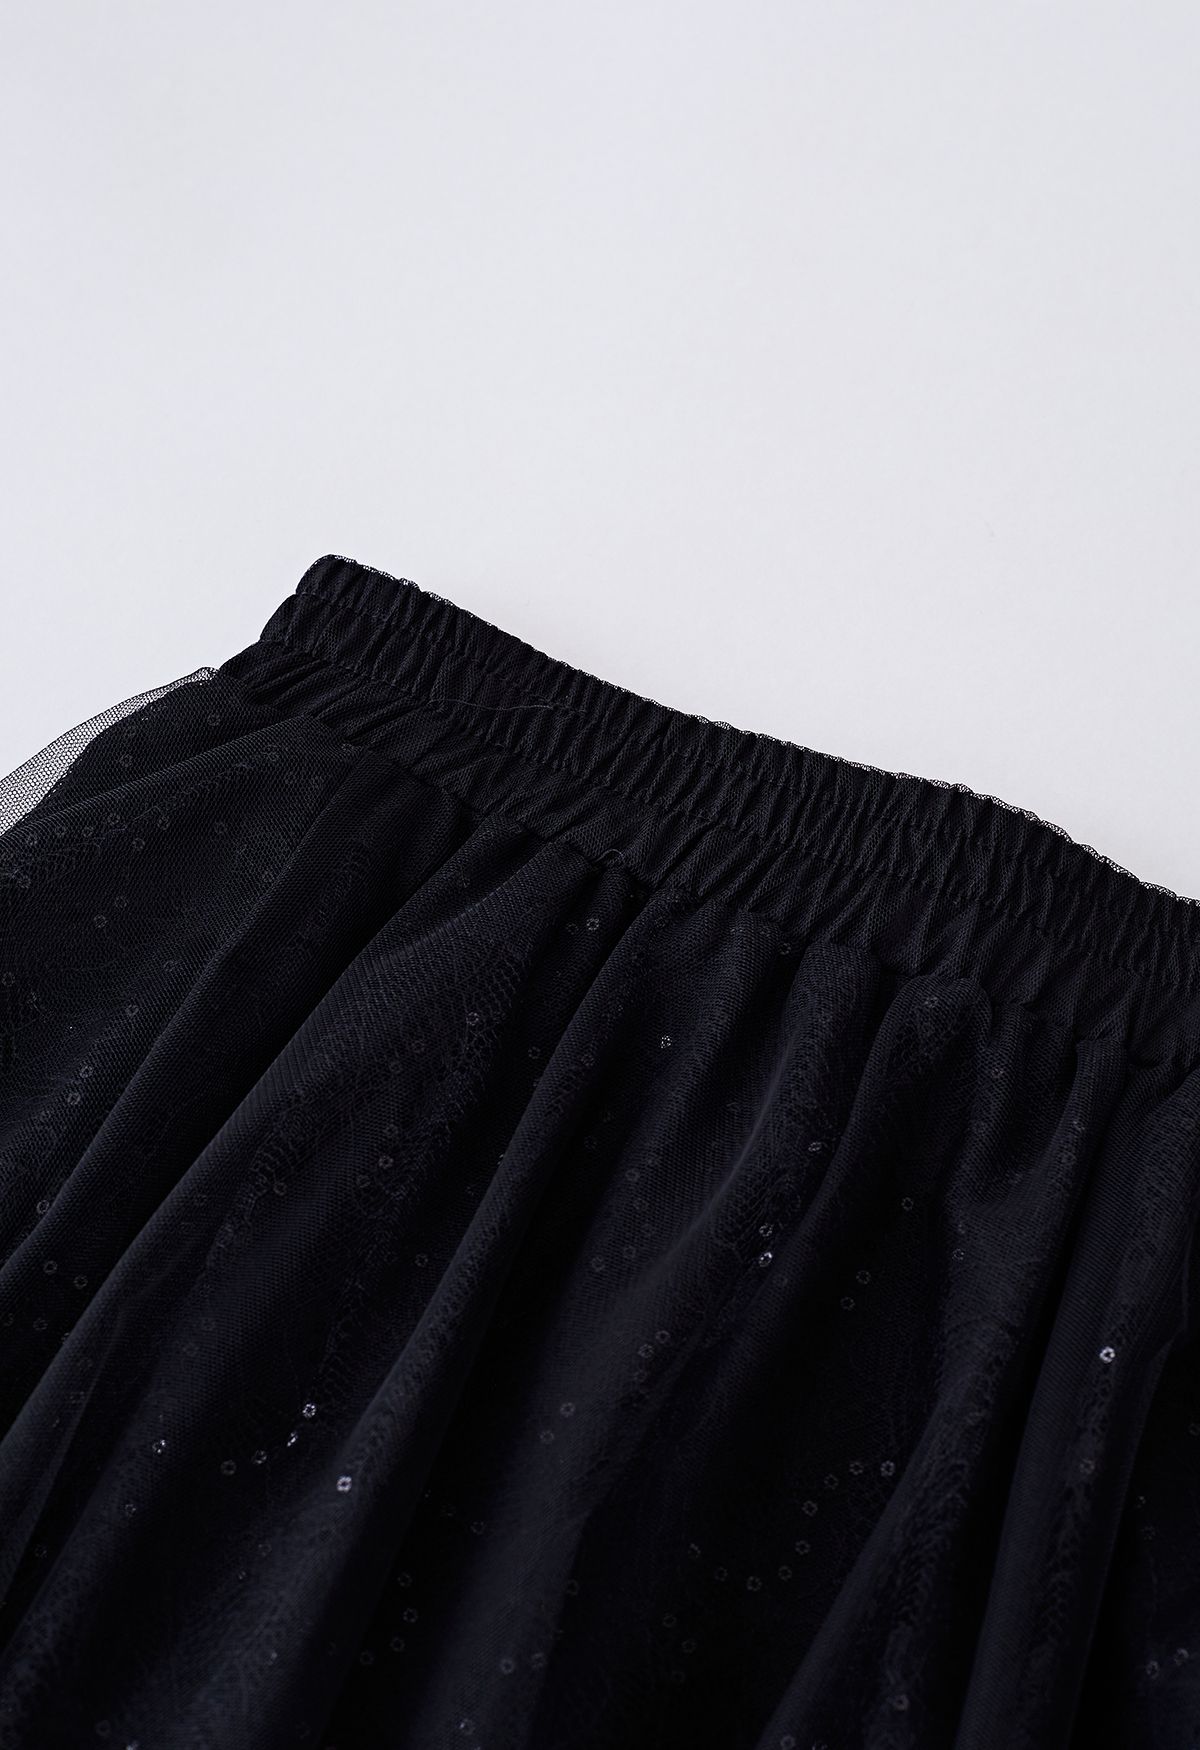 Sequined Floral Lace Mesh Tulle Skirt in Black - Retro, Indie and ...